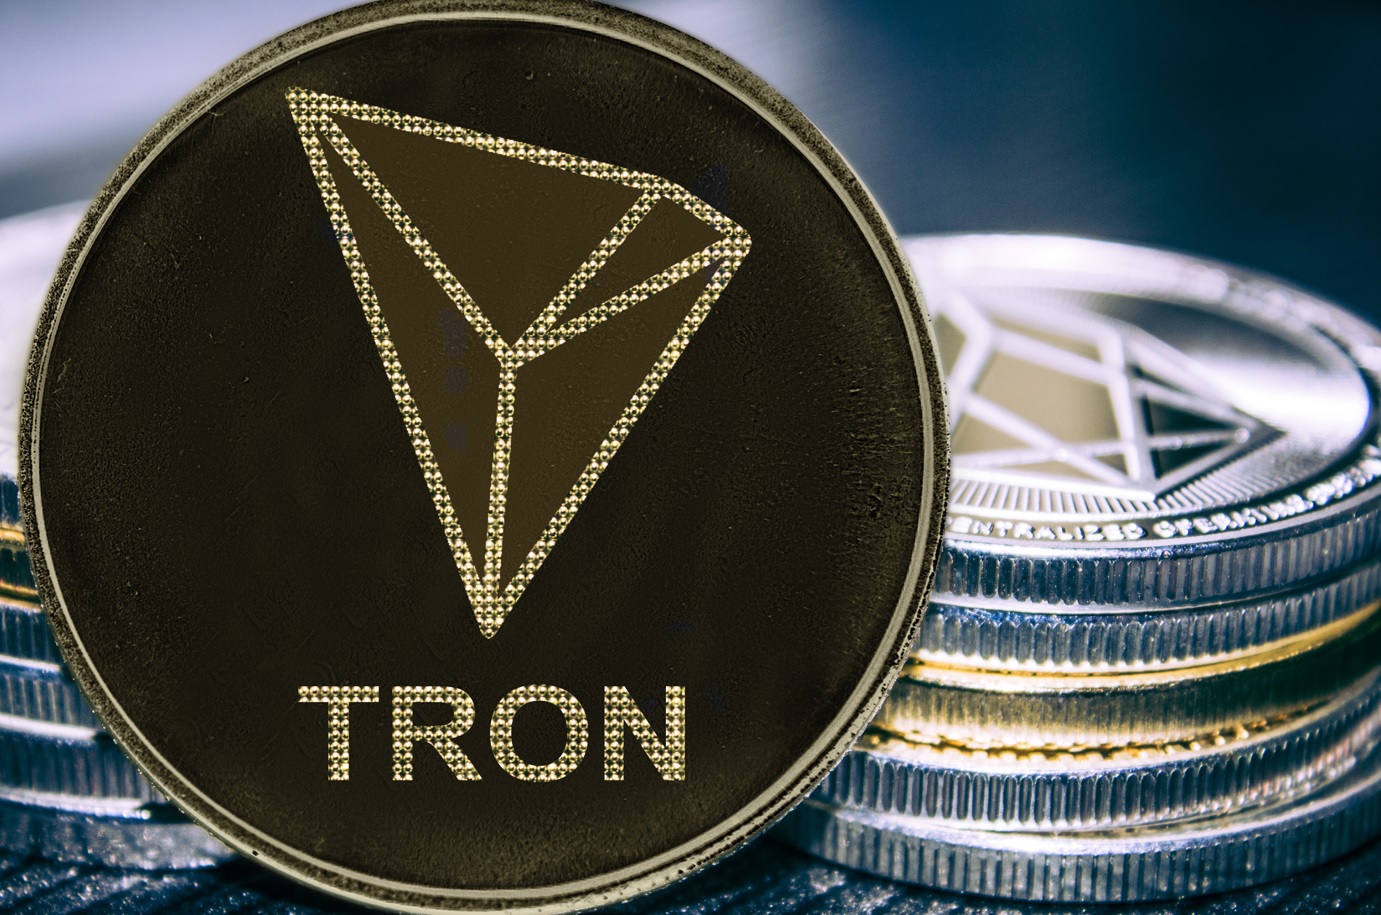 TRX: Tron price has rebounded but USDD is a major risk